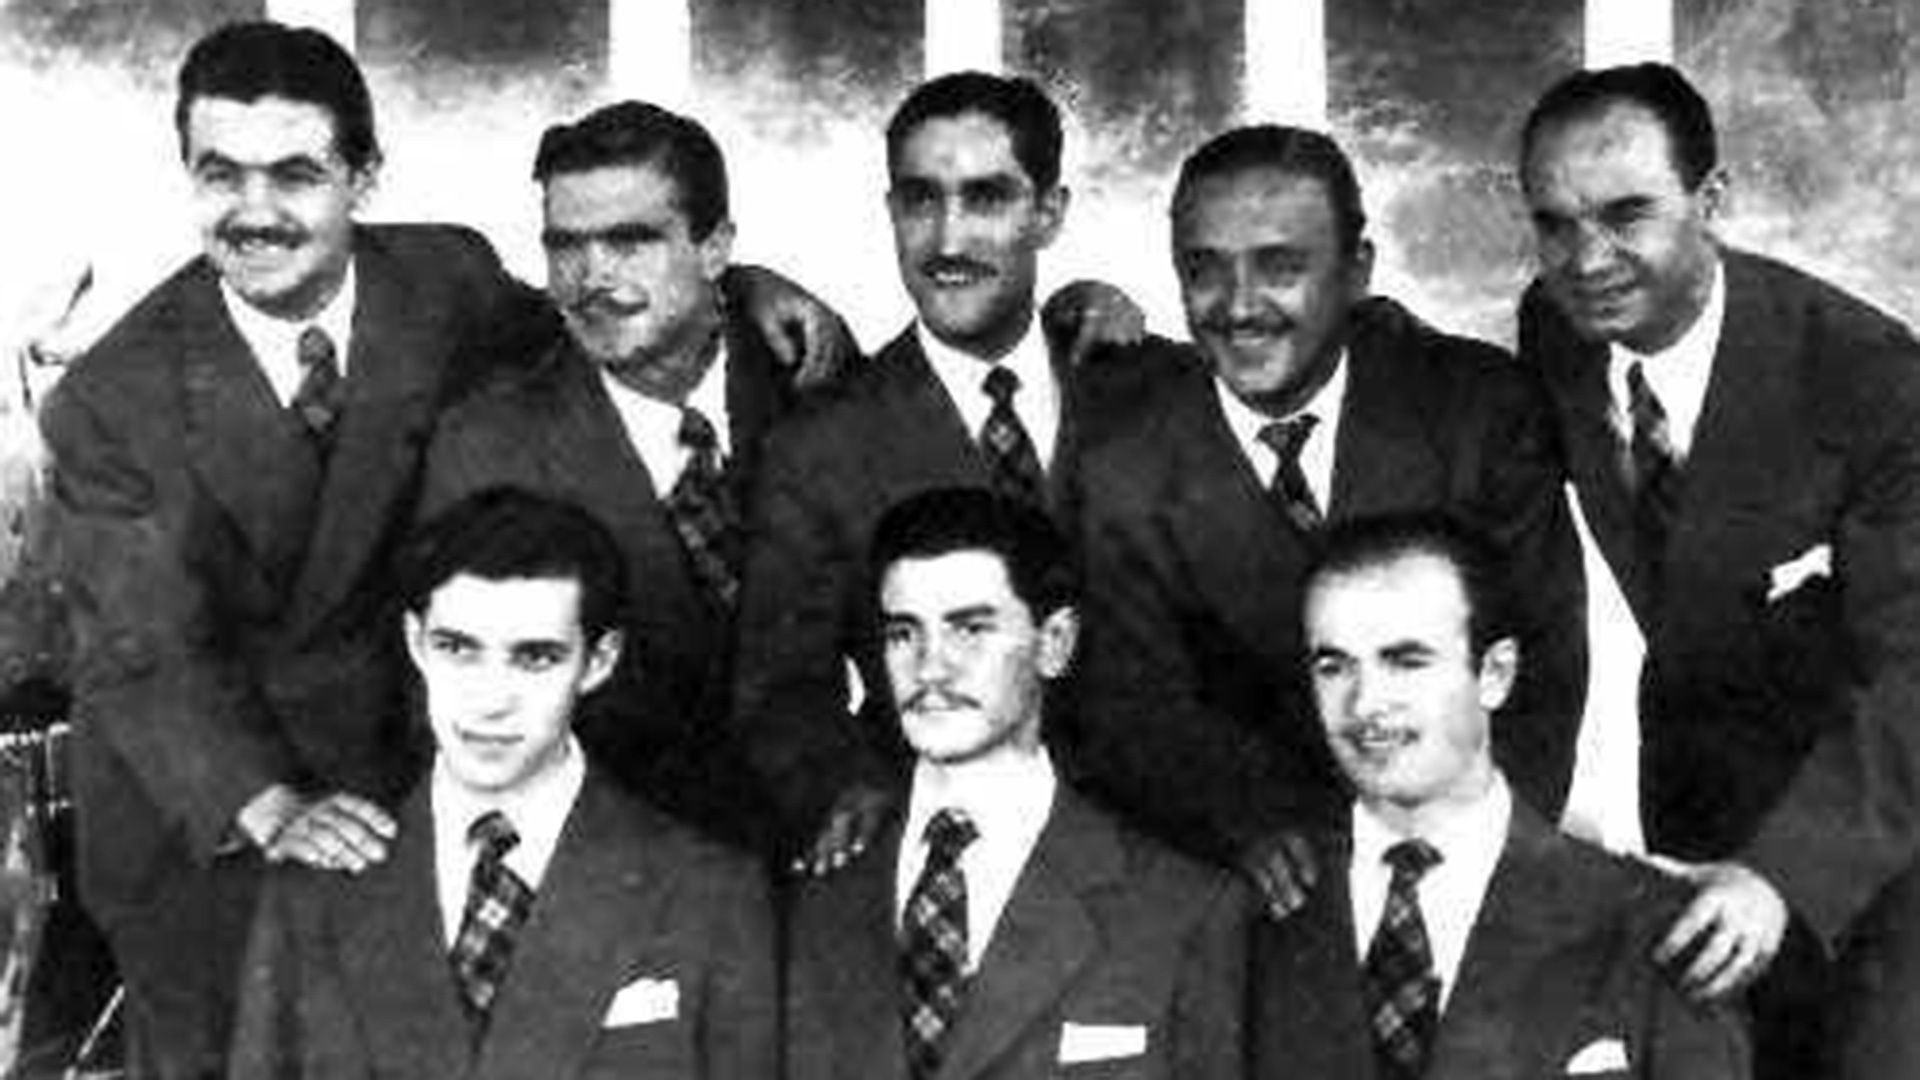 Micky Lerman, first from the left, below, a 17-year-old drummer in the Montecarlo Jazz of Córdoba, long before he was Chico Novarro.  Along with him Luis Ordoñez and Amado Brancolini.  Above, Hugo Forestieri, Pedro Delistovic, Ismael Britos, Tullio Gallo and Marcelo Yocco.